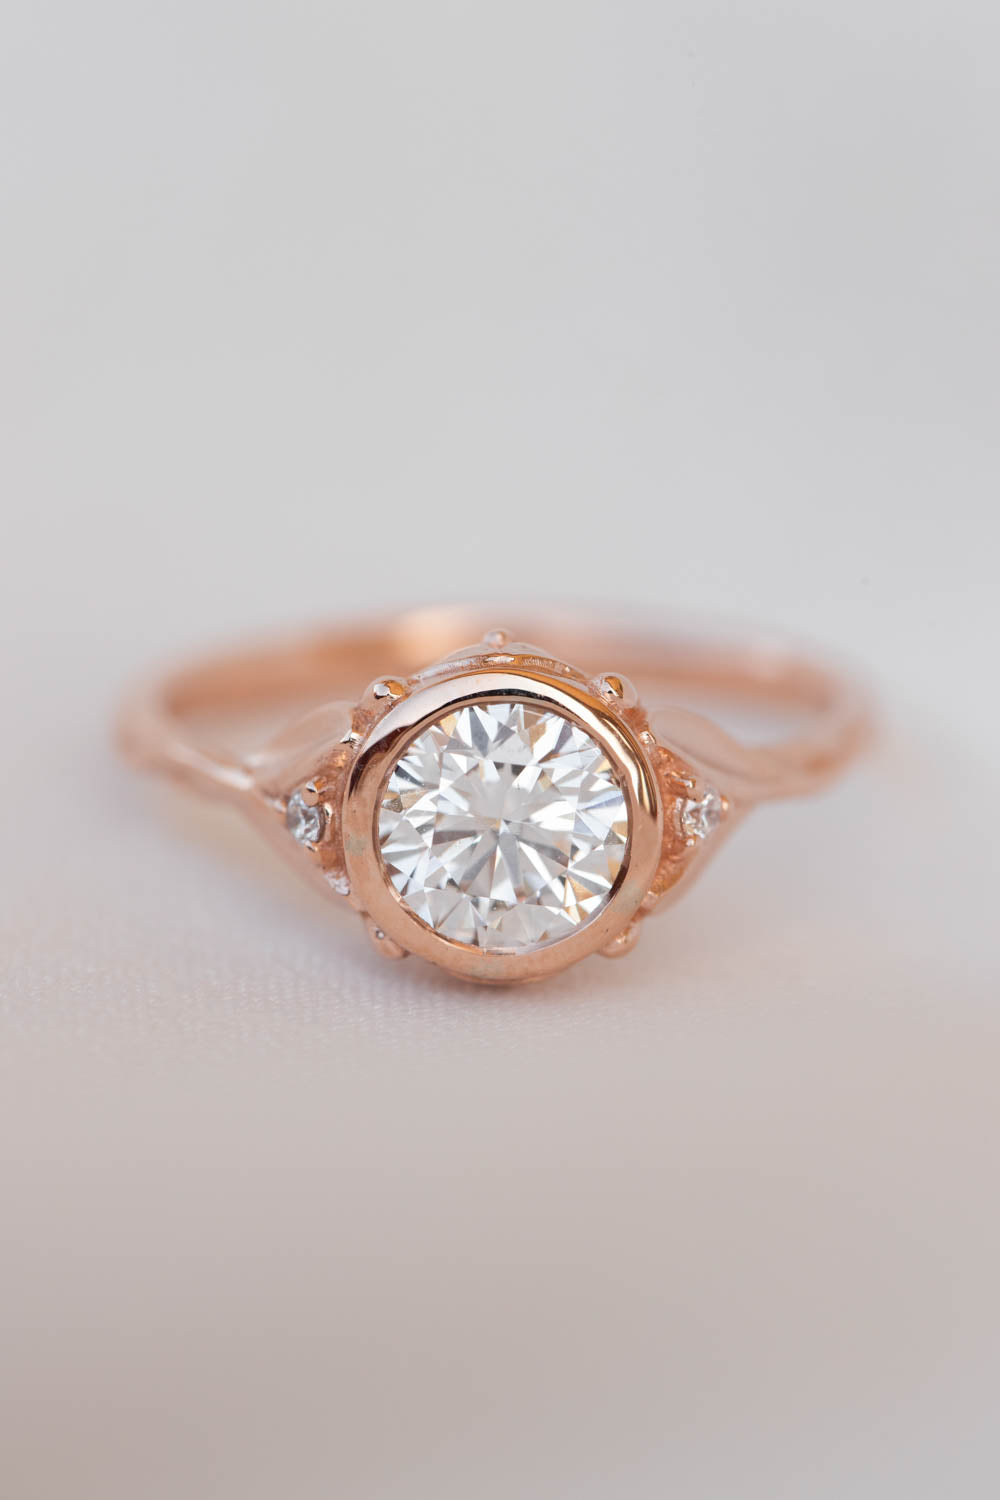 Roma | engagement ring setting with round cut gemstone in bezel 6.5 mm - Eden Garden Jewelry™